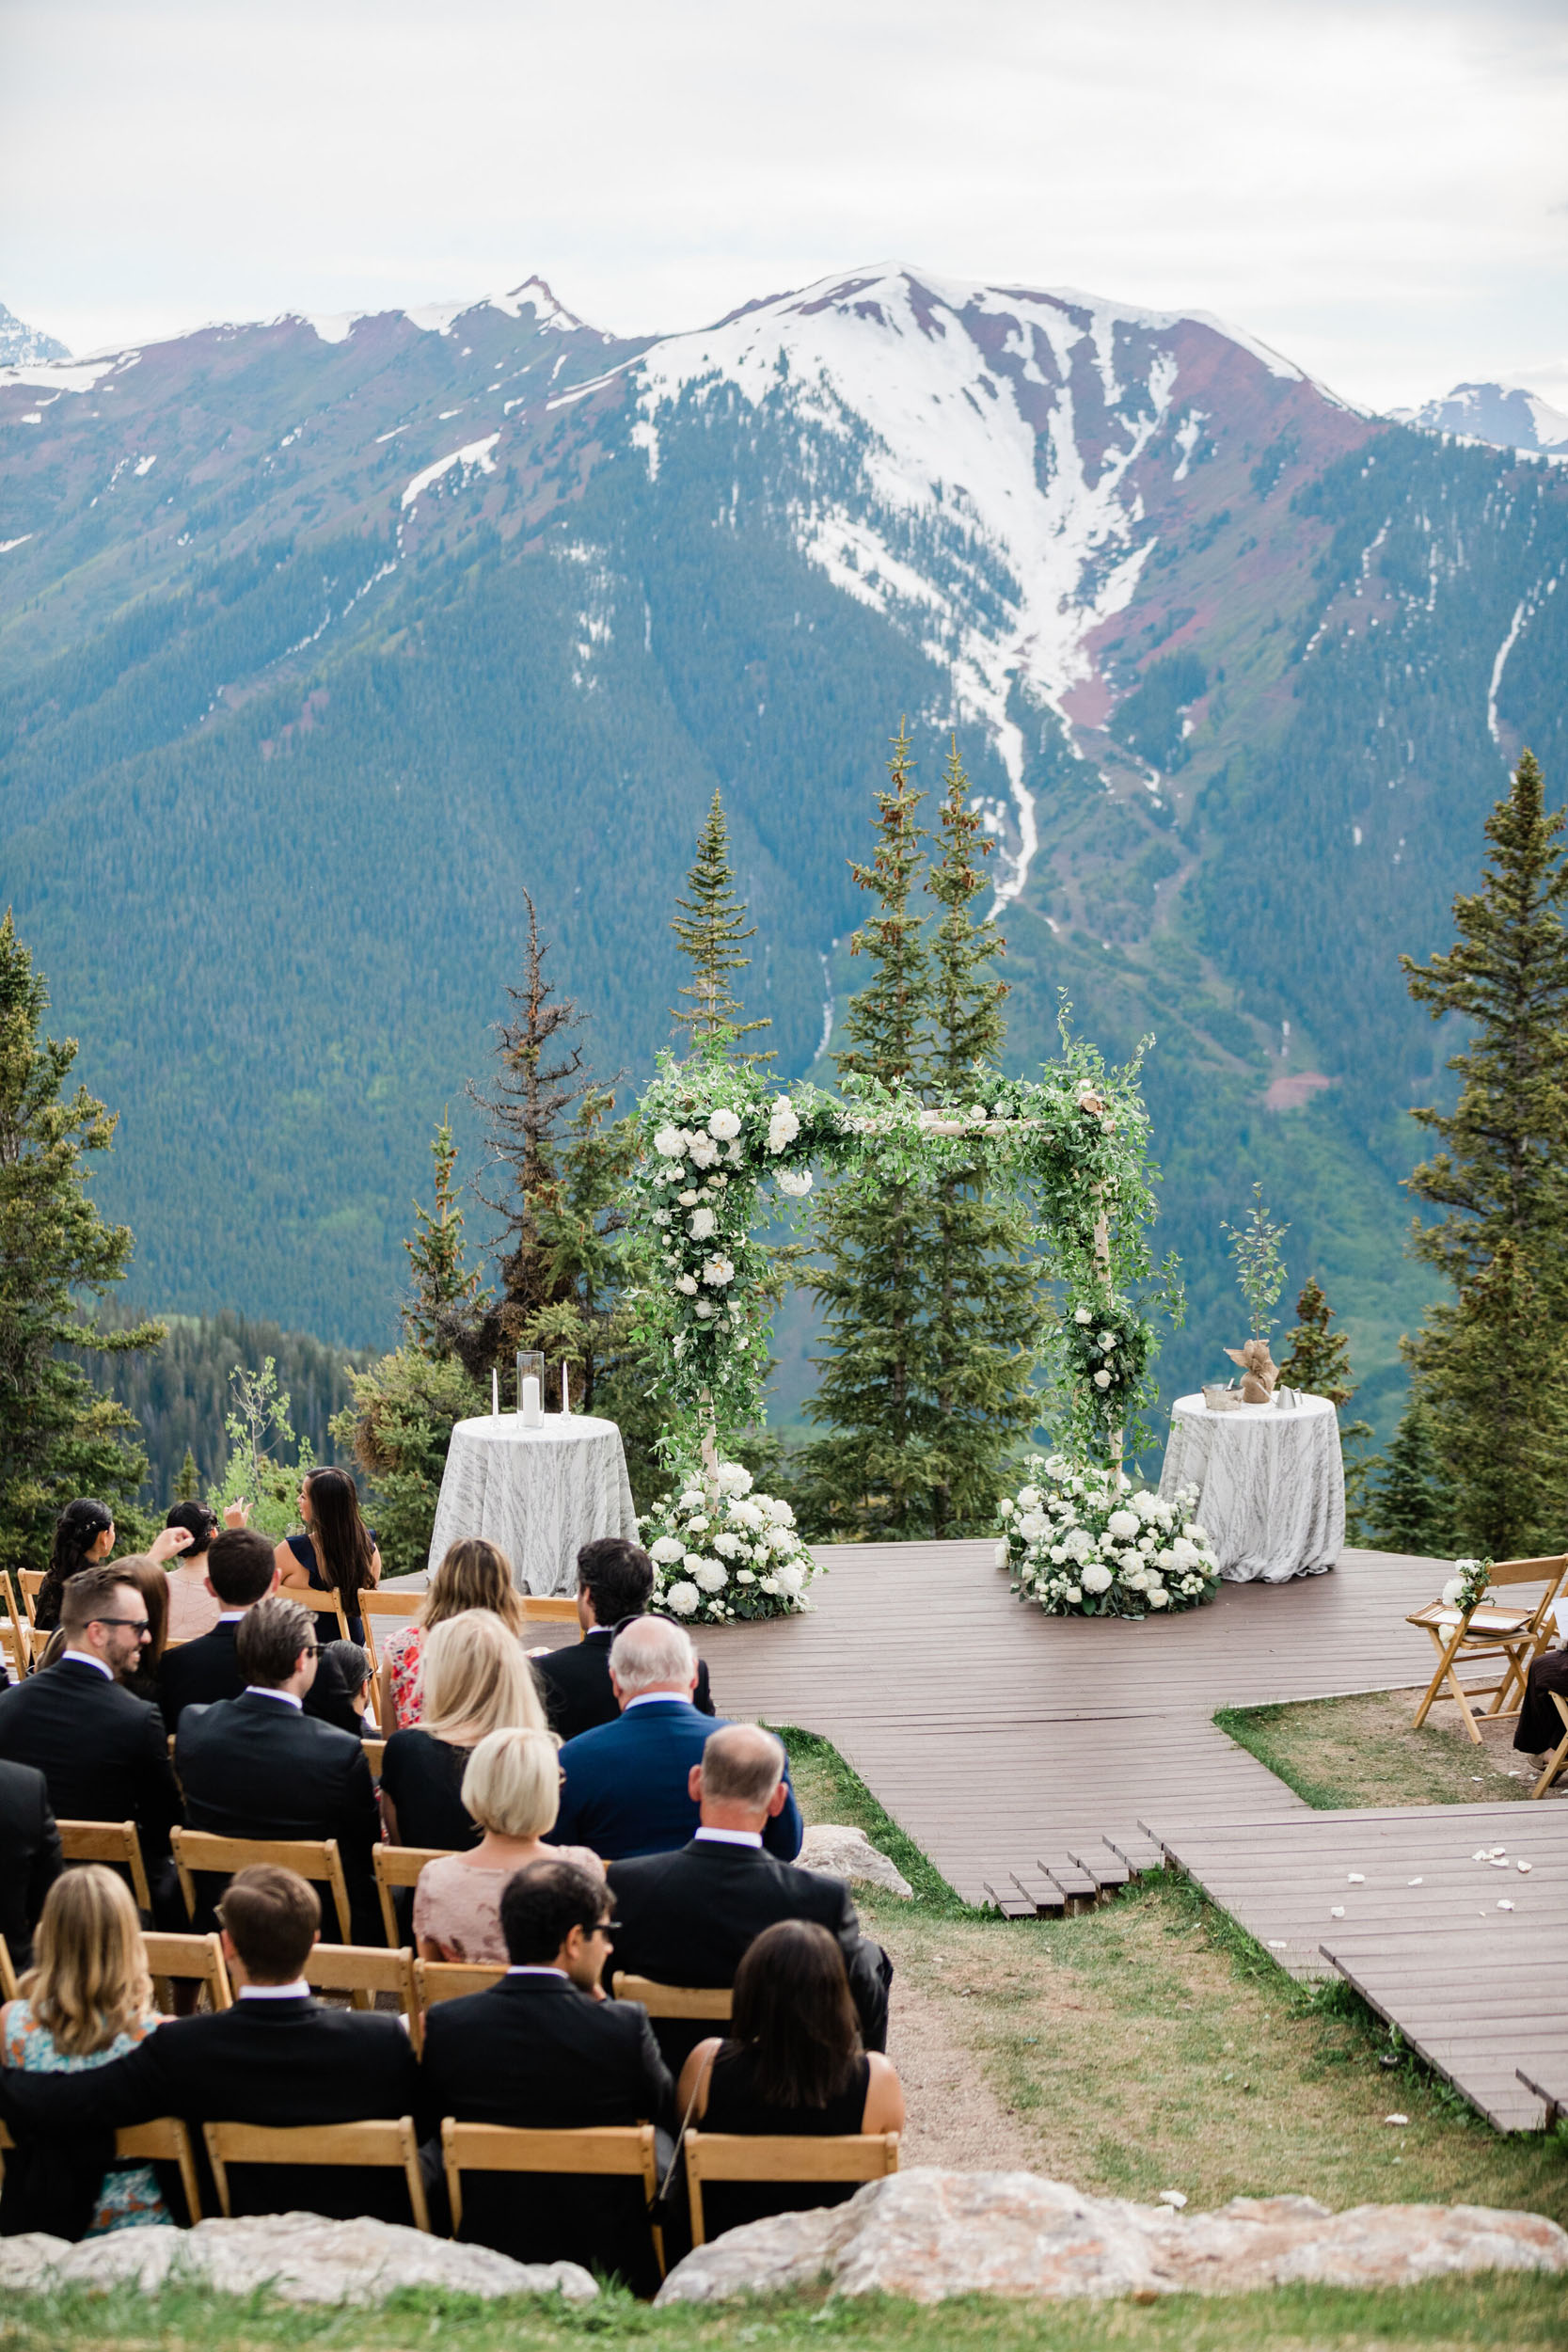 Guests seated on wooden chairs at an outdoor wedding ceremony with a floral arch, facing snow-capped mountains in the background.